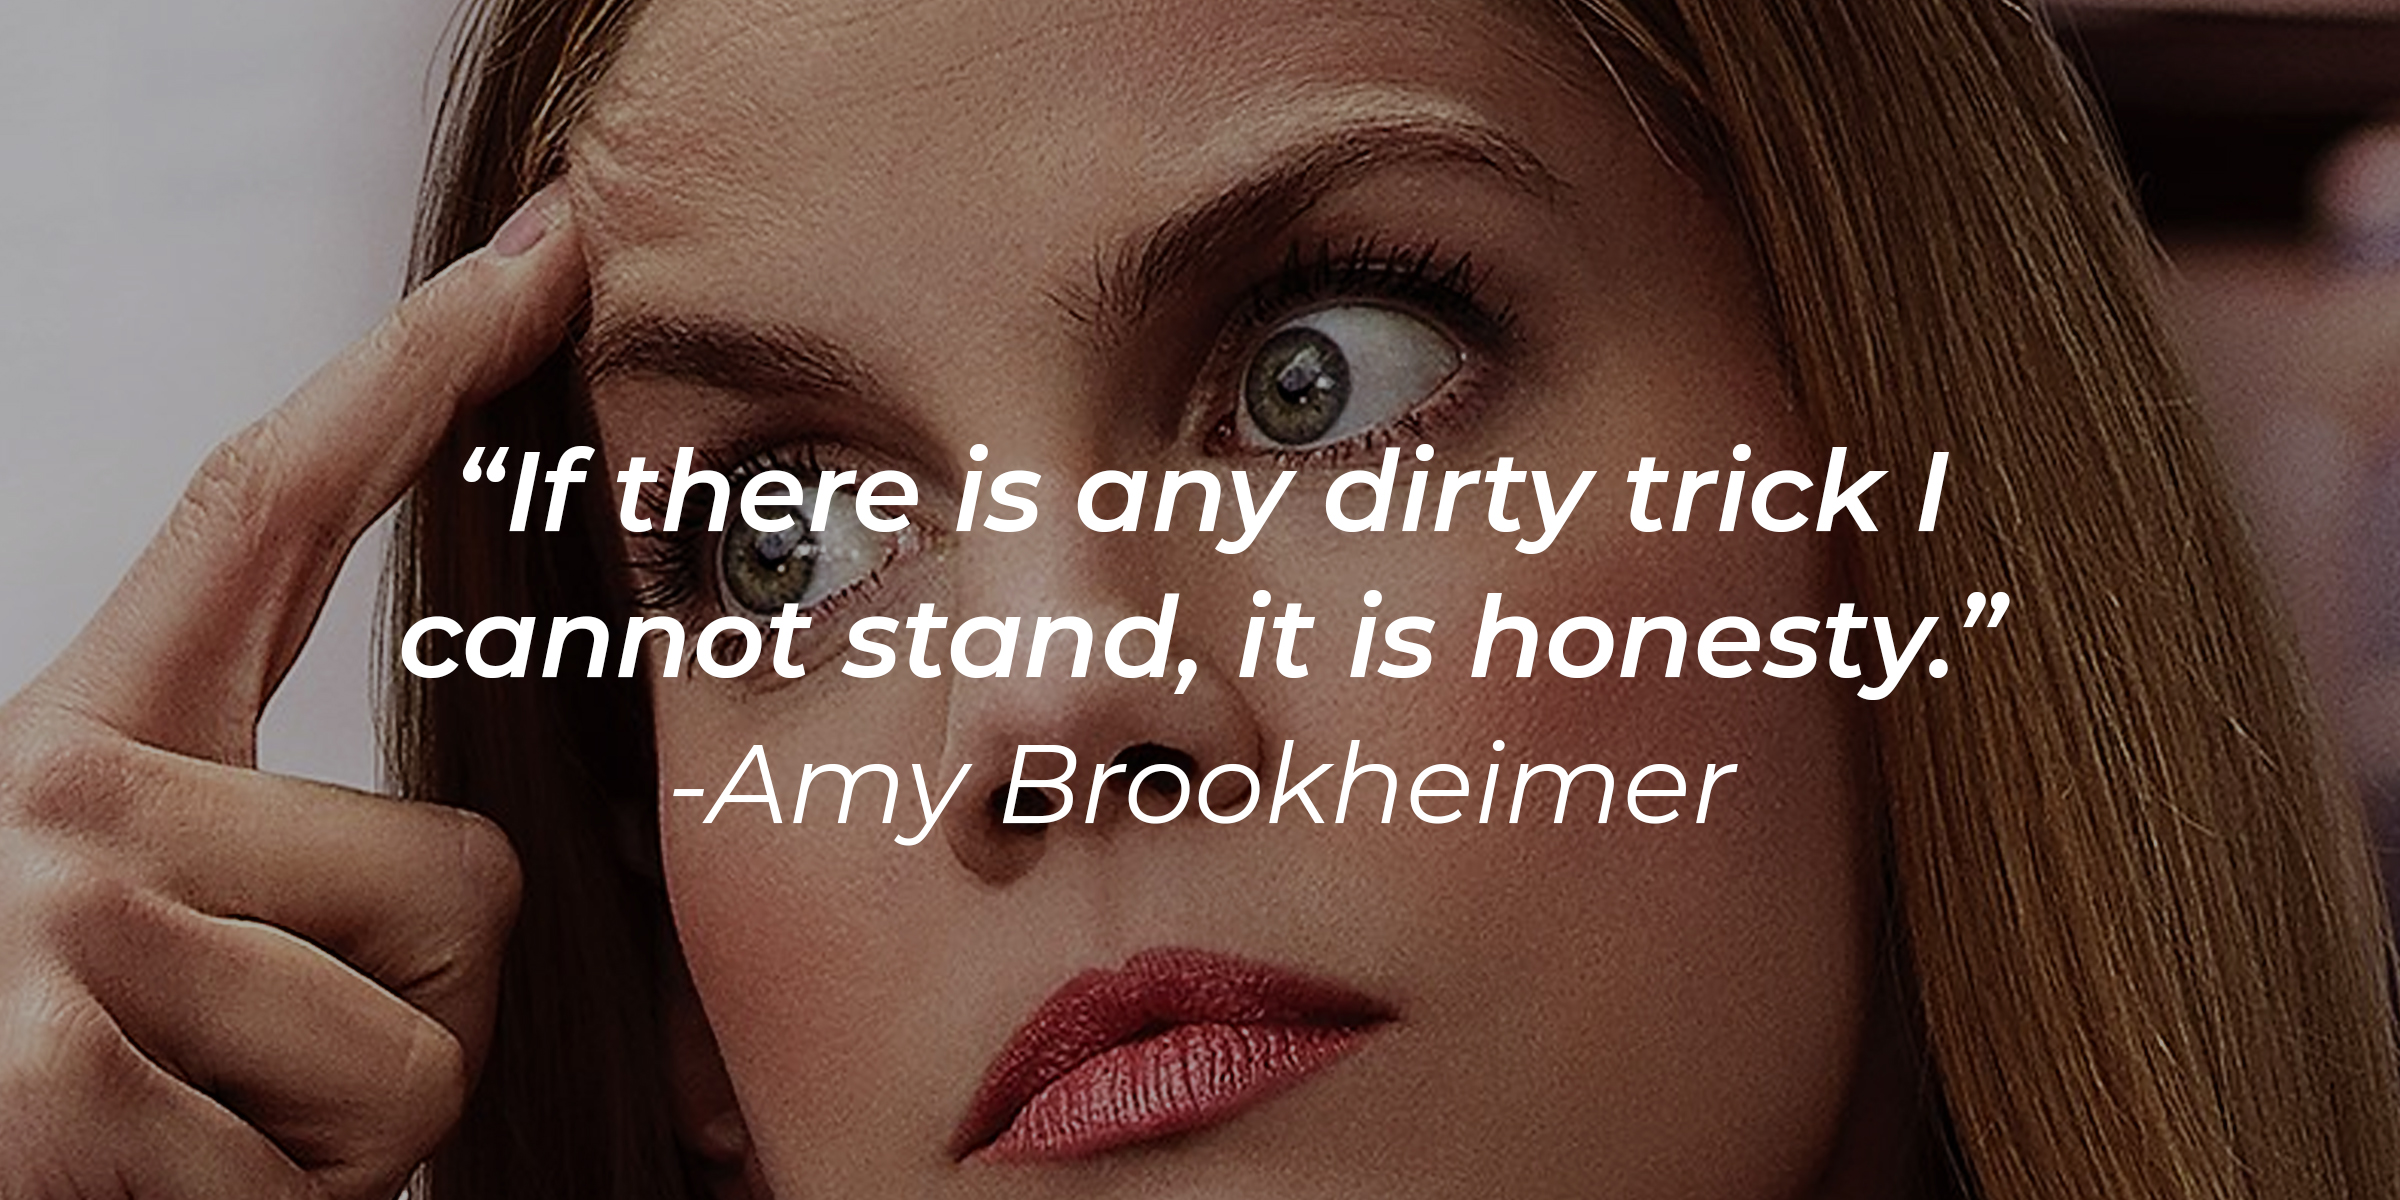 Amy Brookheimer, with her quote: "If there is any dirty trick I cannot stand, it is honesty." | Source: Facebook.com/veep